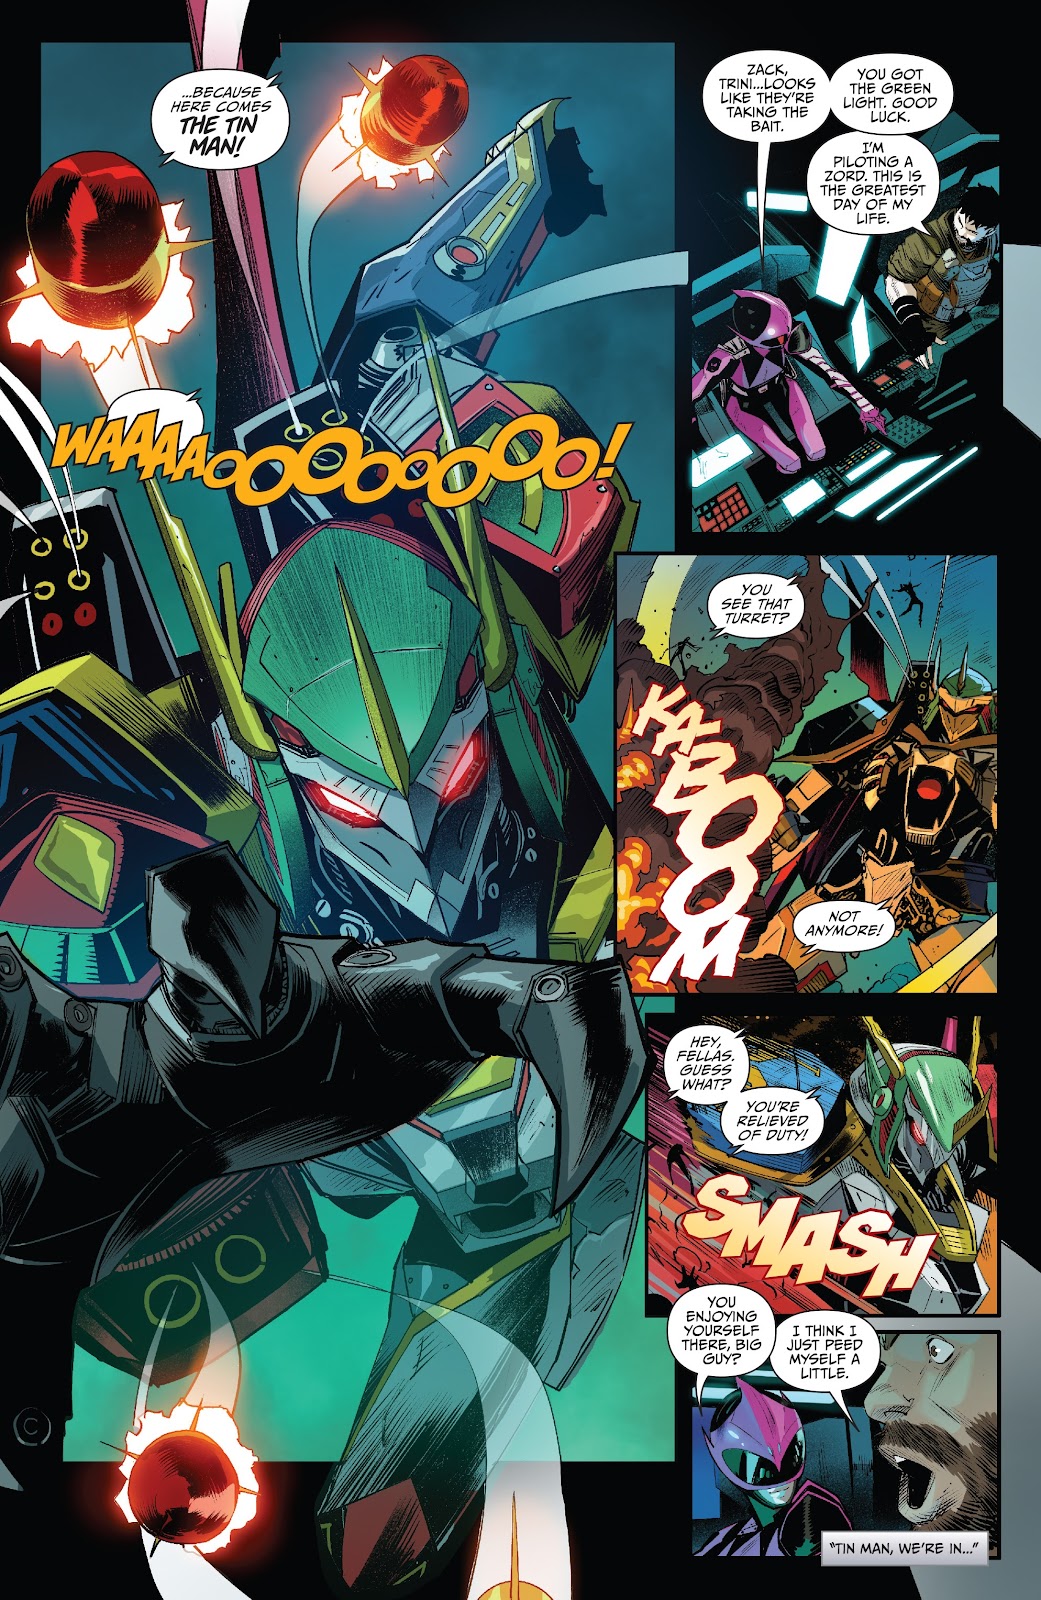 Power Rangers: Ranger Slayer issue 1 - Page 16